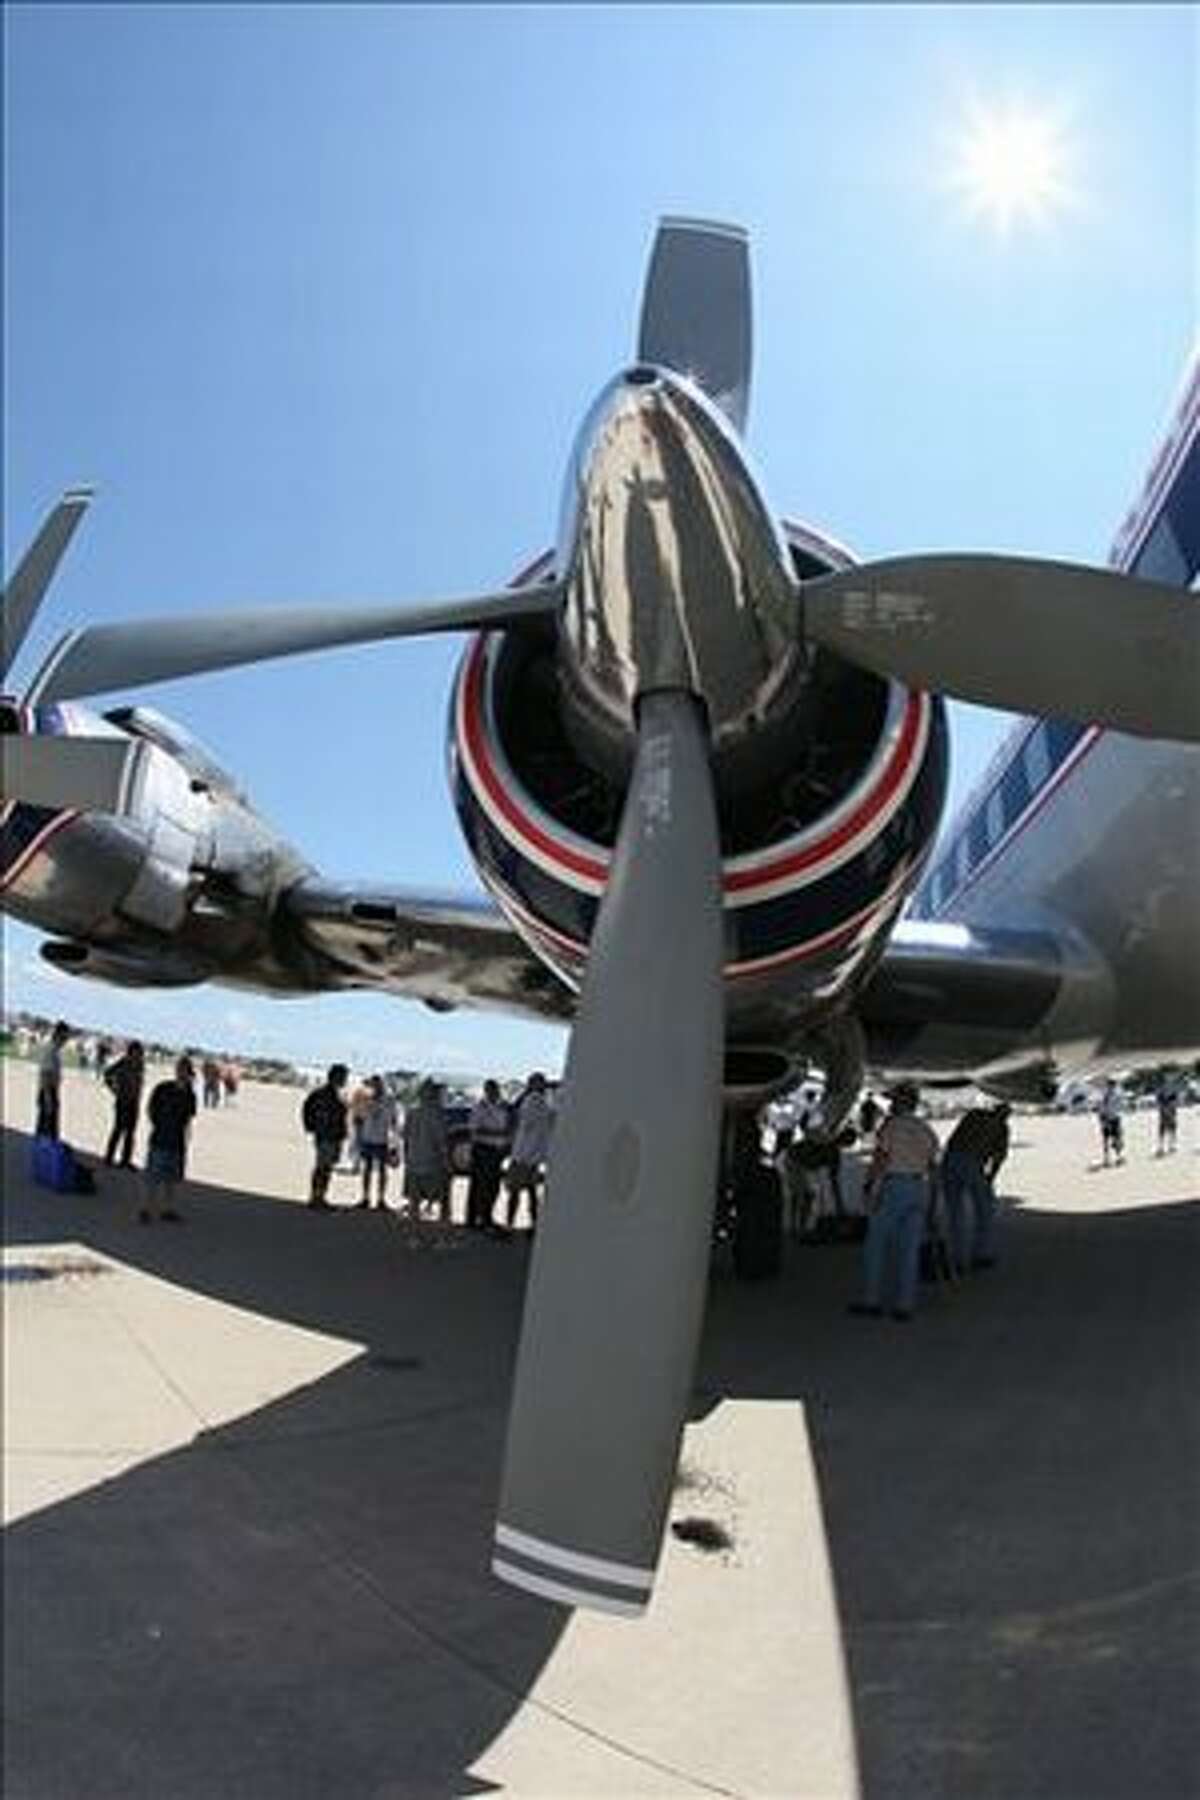 One of the propellers of the DC-7. (Cindy Luft/EAA)